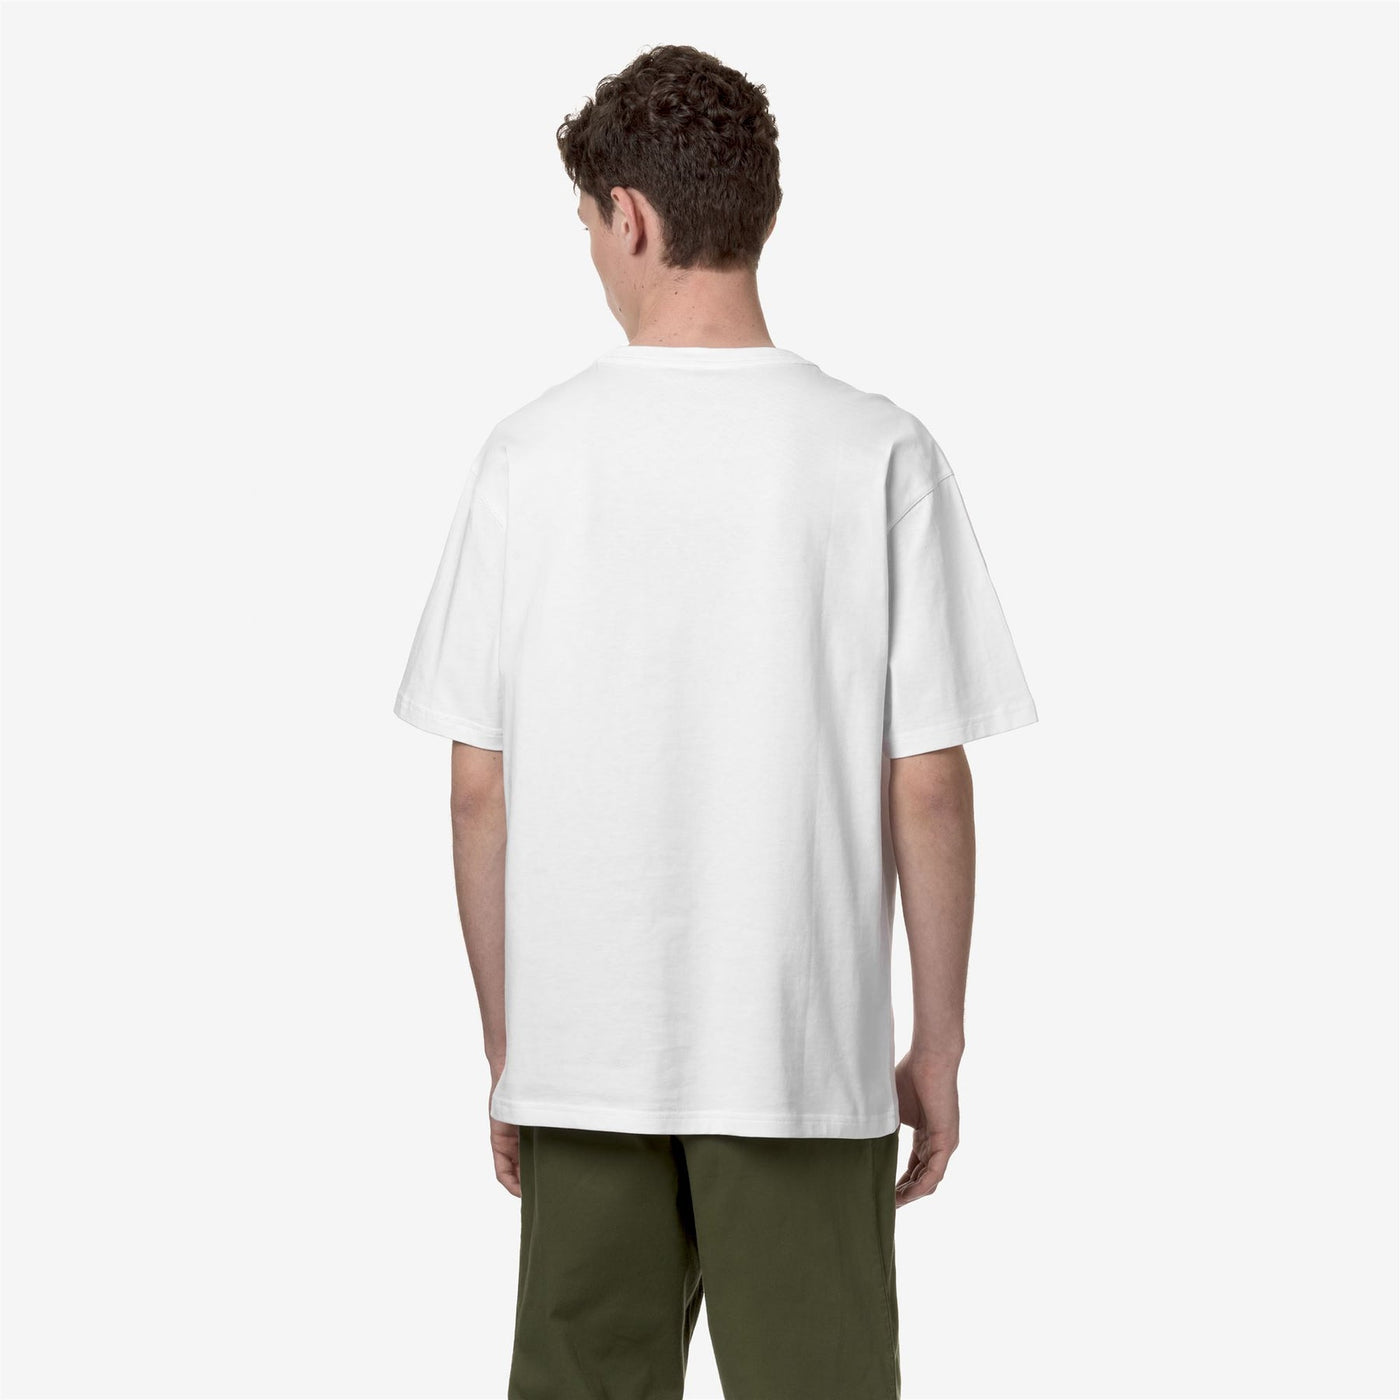 FANTOME CONTRAST POCKETS - T-SHIRTS & TOP - MAN - WHITE